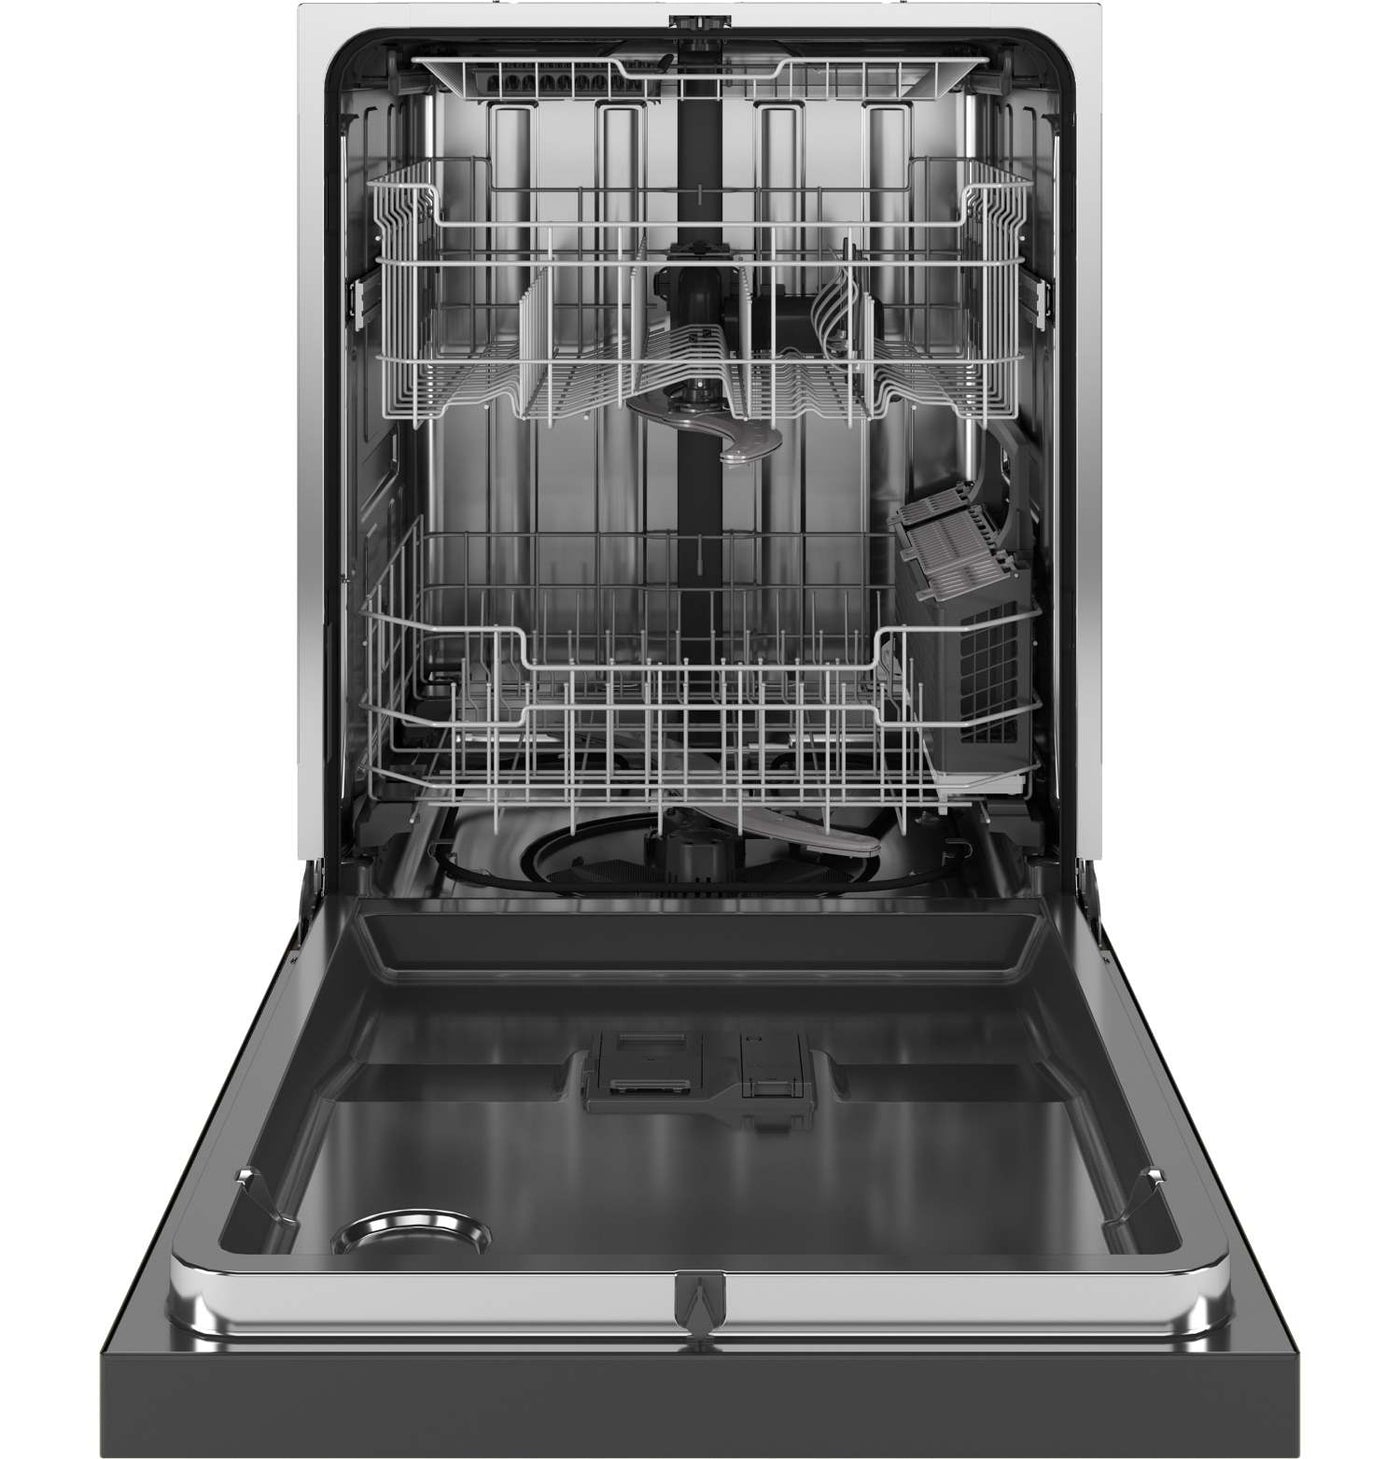 GE 24" Fingerprint Resistant Stainless Steel Front Control Dishwasher with Stainless Steel Interior and Third Rack - GDF670SYVFS